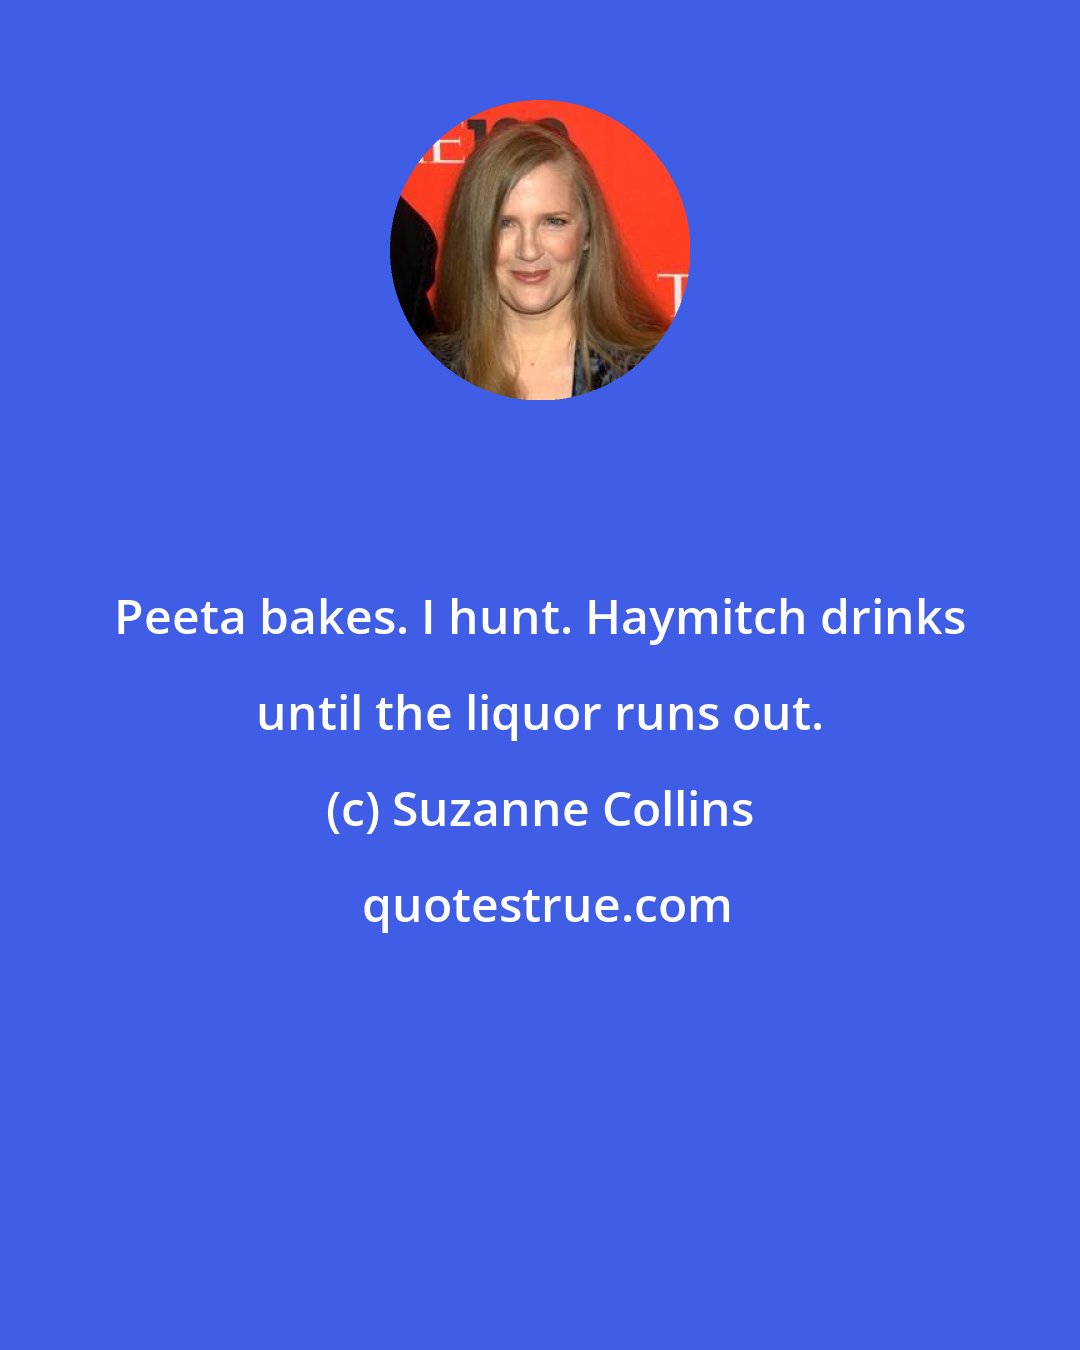 Suzanne Collins: Peeta bakes. I hunt. Haymitch drinks until the liquor runs out.